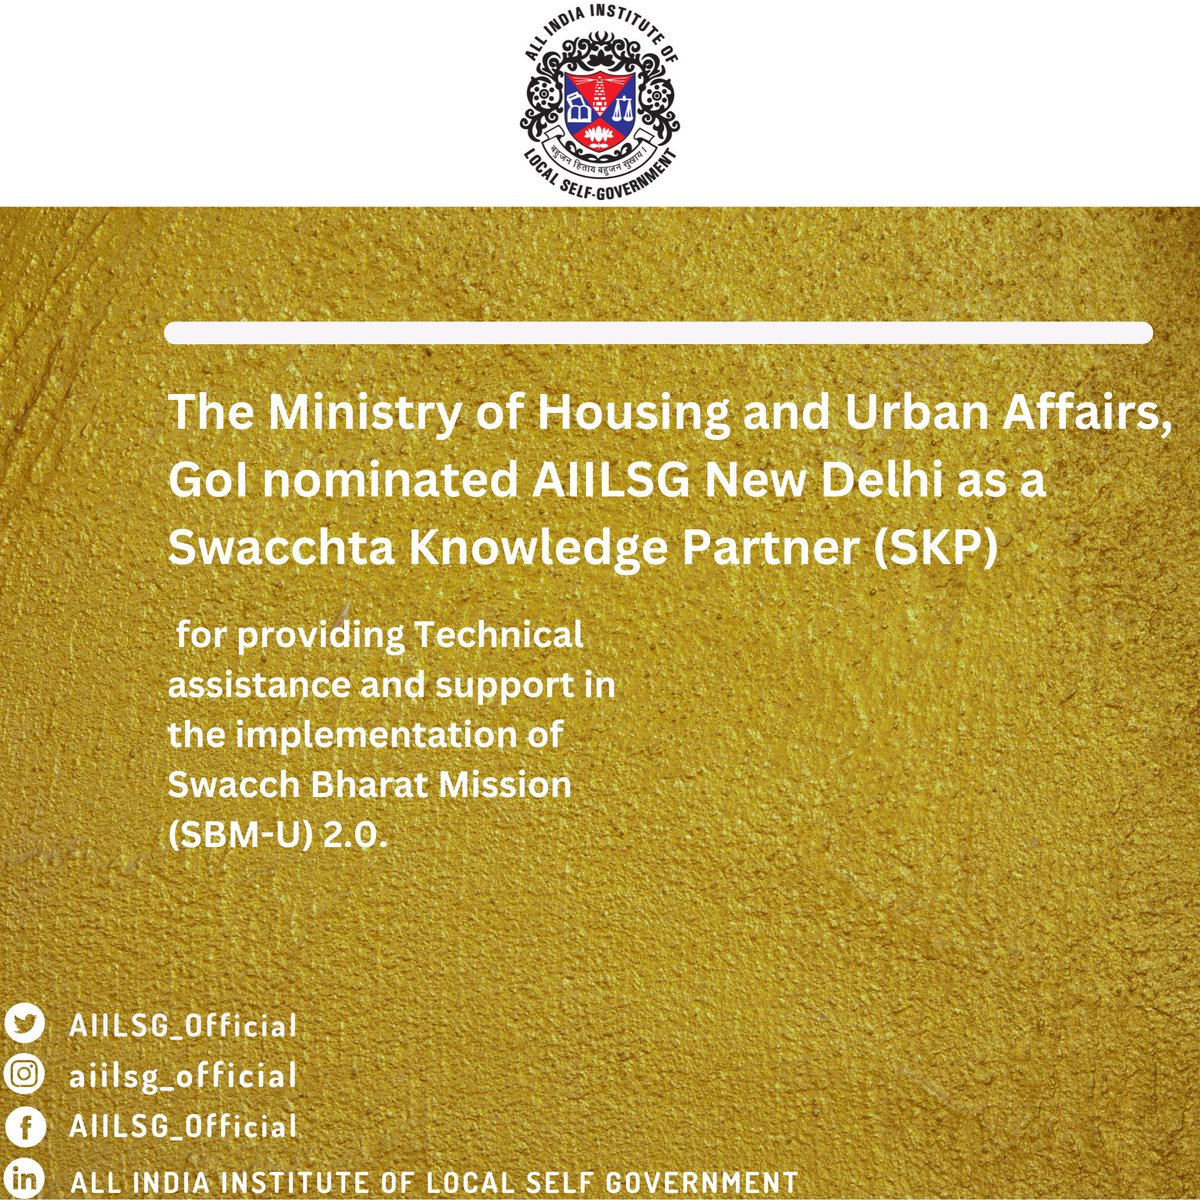 AIILSG is pleased to announce that it has been empaneled as a Swachh Knowledge Partner (SKP) for #SwachhBharatMission (SBM). The SKPs are a group of organizations that have been selected @MoHUA_India to provide technical assistance and support to the implementation of SBM 2.0.